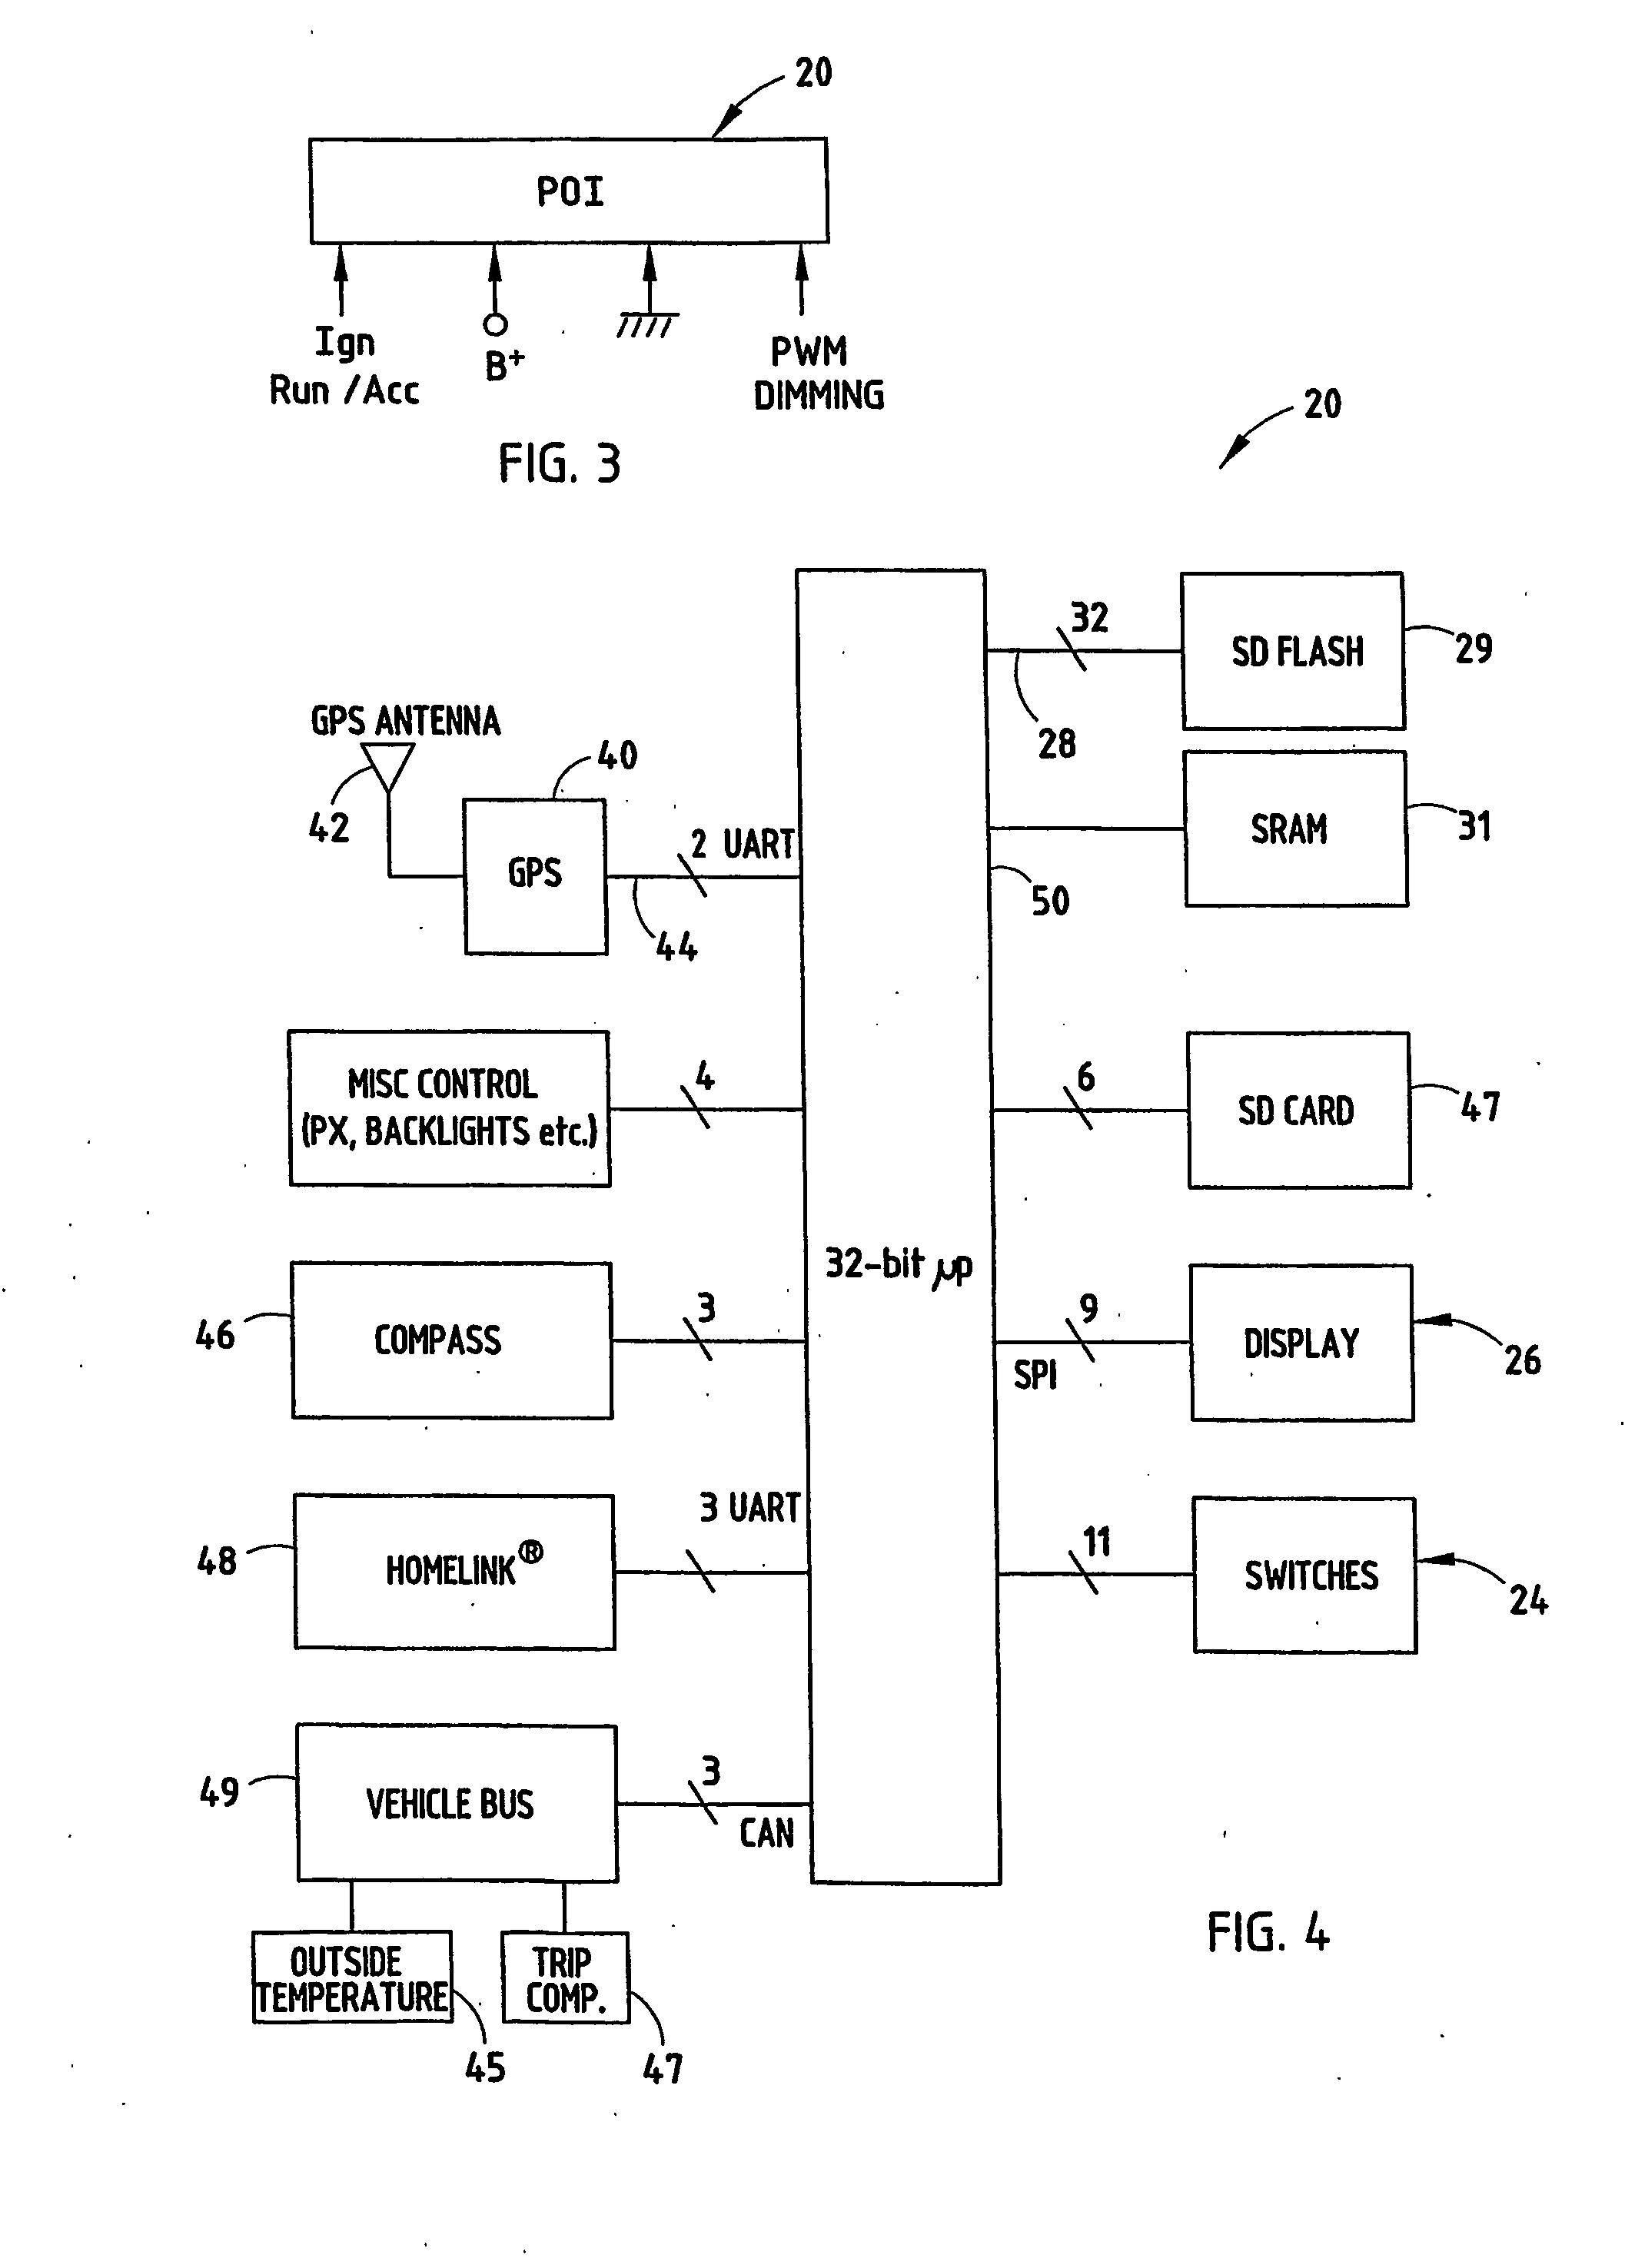 Point-of-interest display system